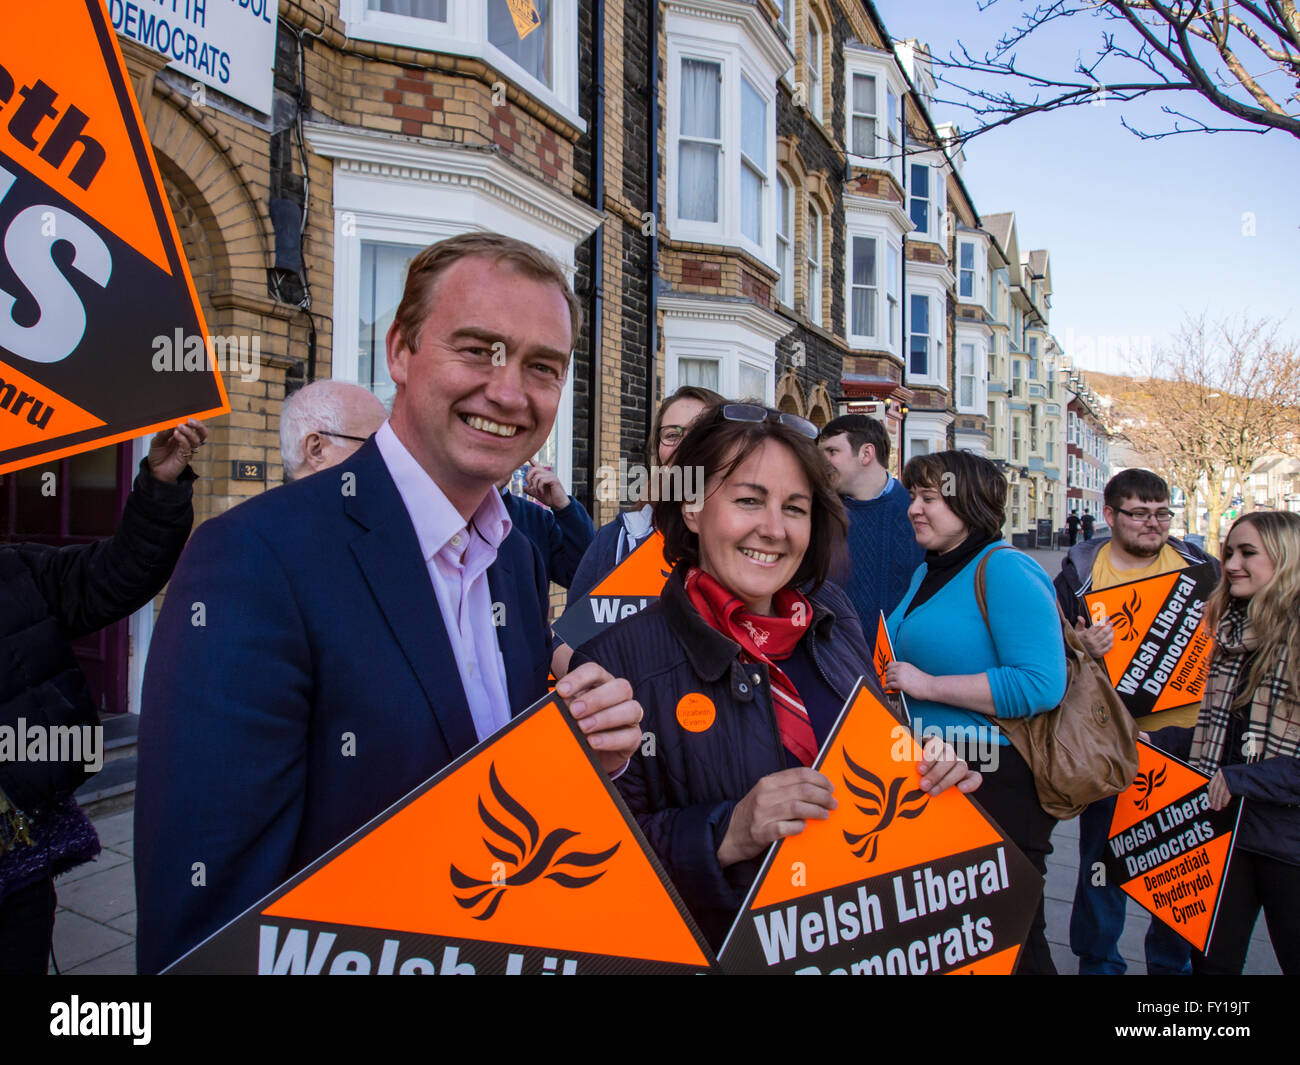 Aberystwyth, UK. 19th April, 2016. Liberal Democrat Leader TIM FARRON MP visits Aberystwyth. TIM FARRON spends the evening out canvassing with local Lib Dem activists in support of ELIZABETH EVANS campaign for the Welsh Assembly in Llanbadarn Fawr and Bow Street. Credit:  Veteran Photography/Alamy Live News Stock Photo